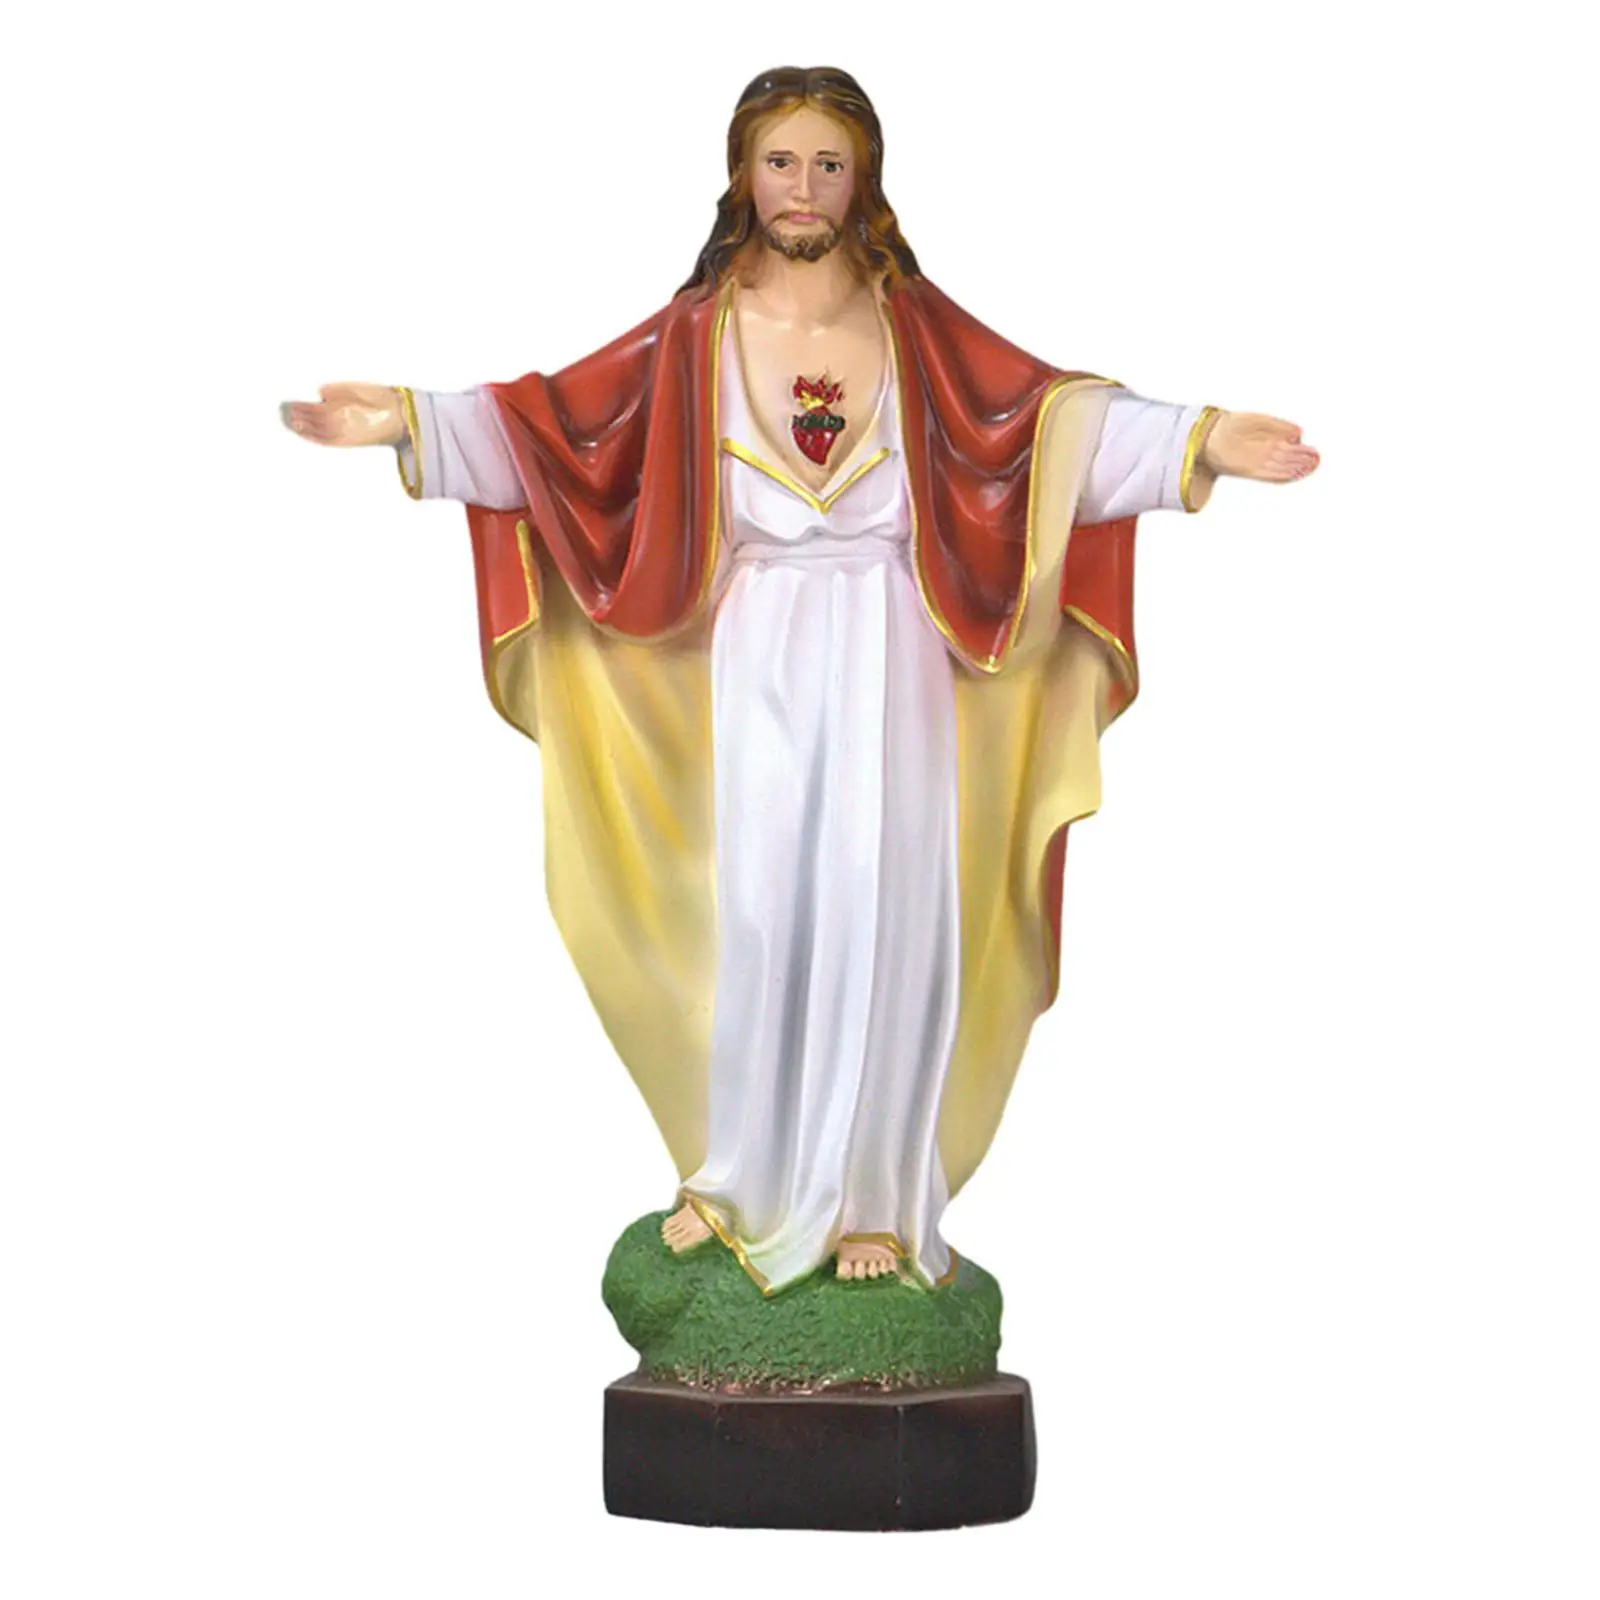 Holy Jesus Figures Decorative Catholic Statue for Home Office Church Cabinet